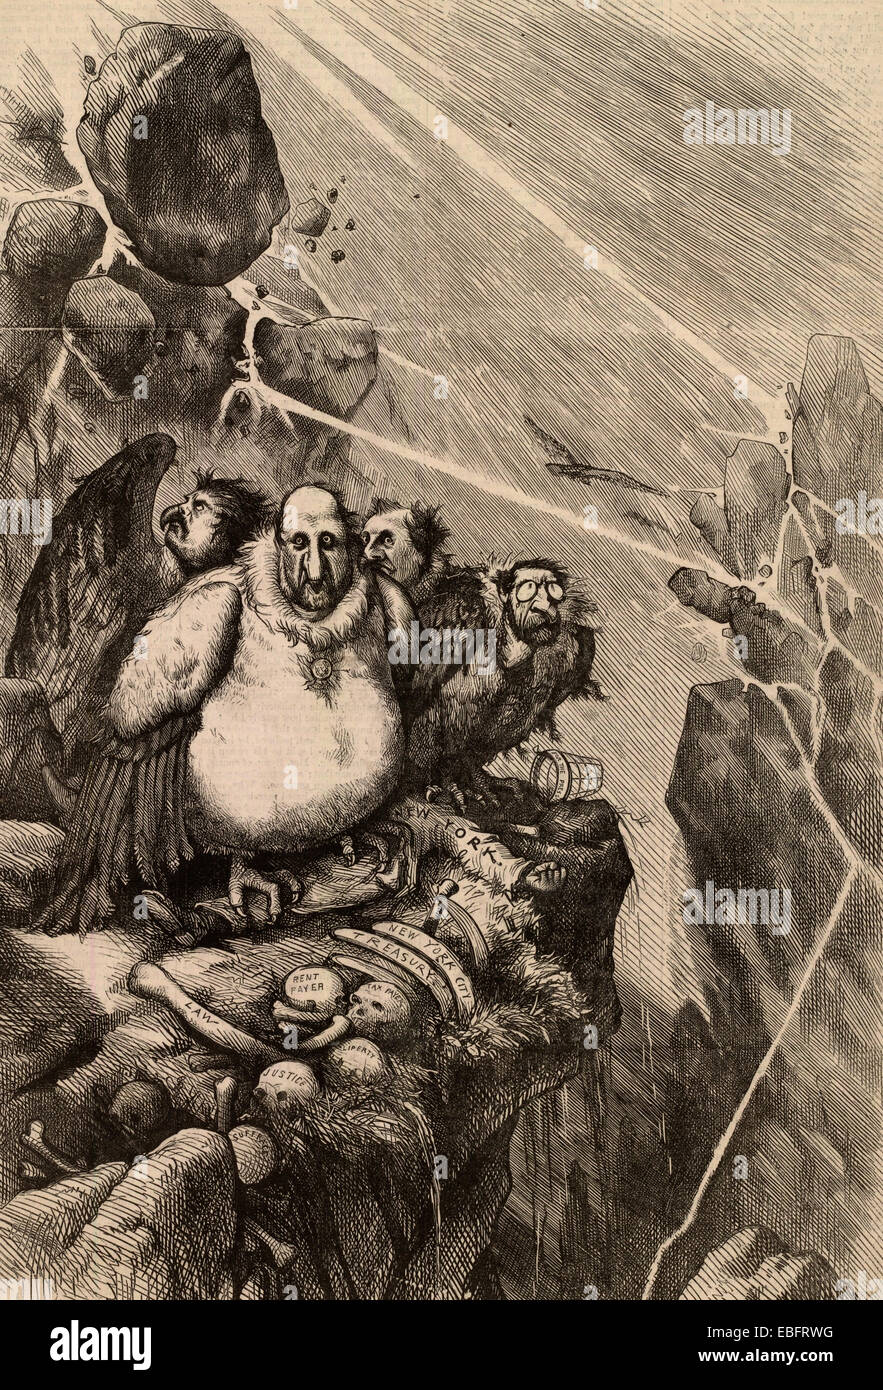 A Group of Vultures waiting for the storm to blow over - Let us prey. William 'Boss' Tweed and members of his ring, Peter B. Sweeny, Richard B. Connolly, and A. Oakey Hall, weathering a violent storm on a ledge with the picked-over remains of New York City. Political Cartoon, 1871 Stock Photo